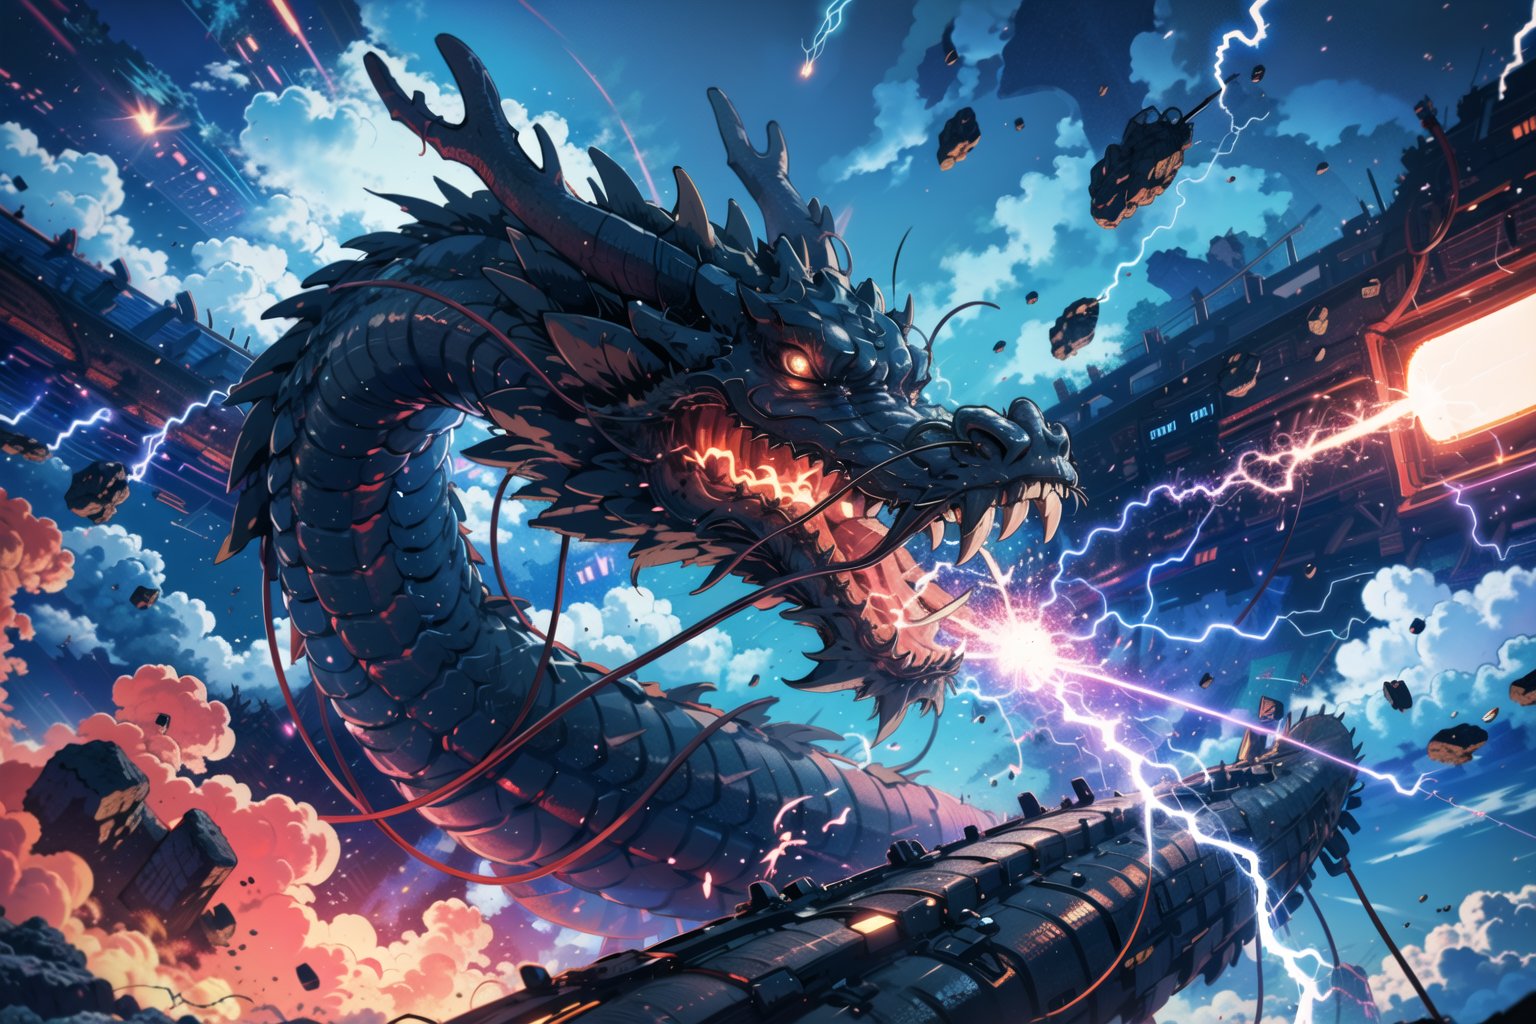 eastern dragon, energy cannon, sky, electricity, glowing, cloud, lightning, science fiction